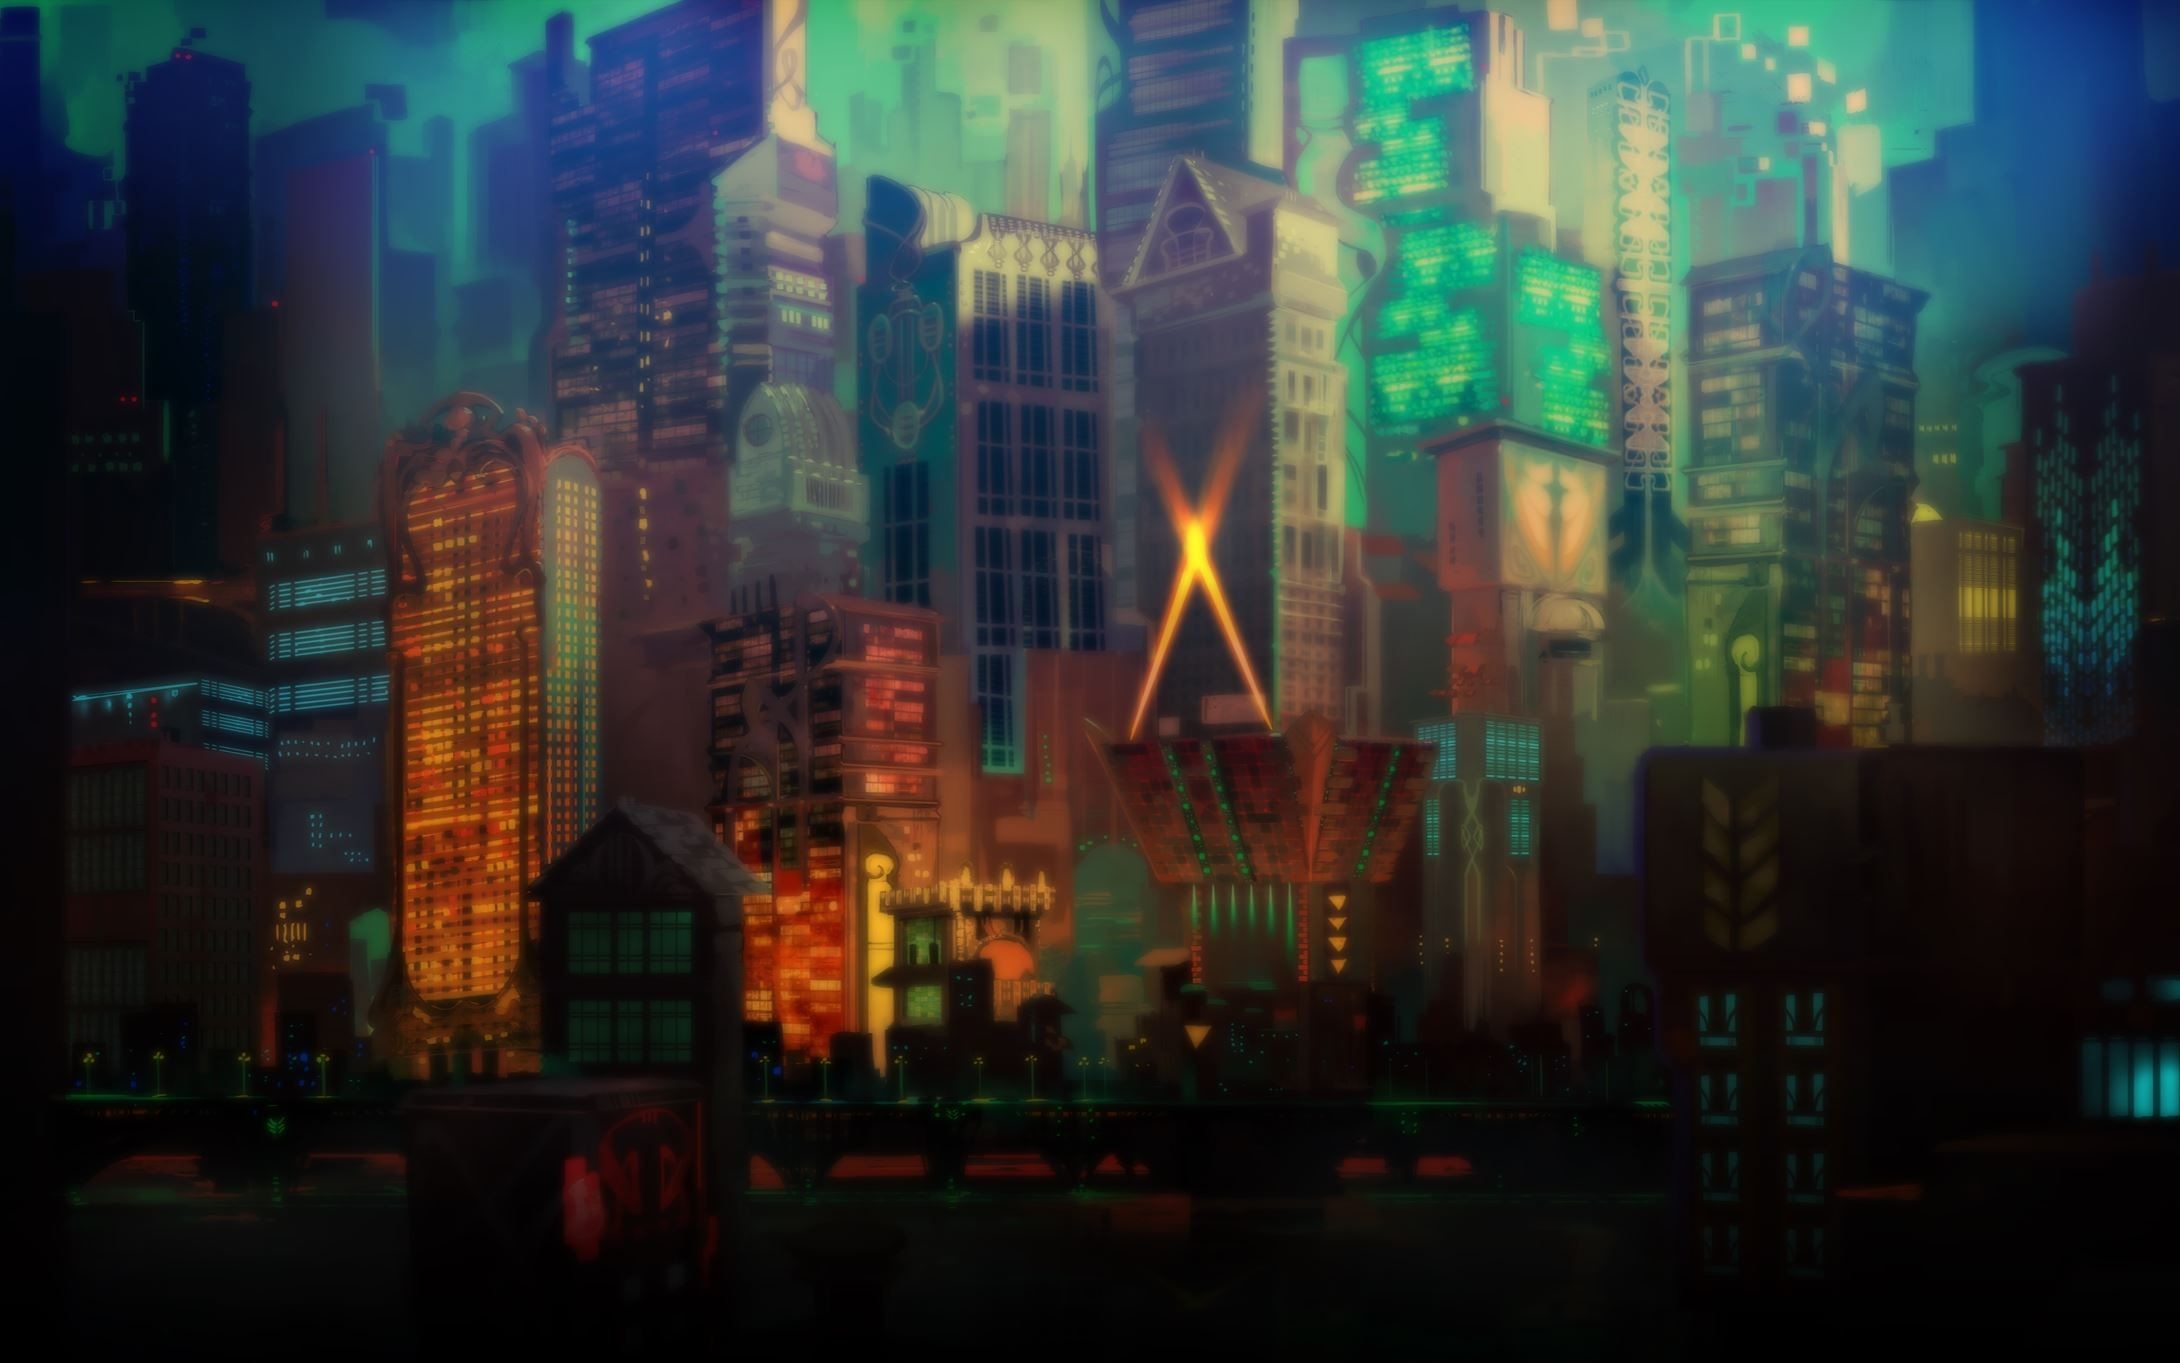 2180x1363 Taken from SuperGiant's own website: a 1680x1050 wallpaper of art from  their newest game "Transistor" (they're the dev team that created "Bastion")